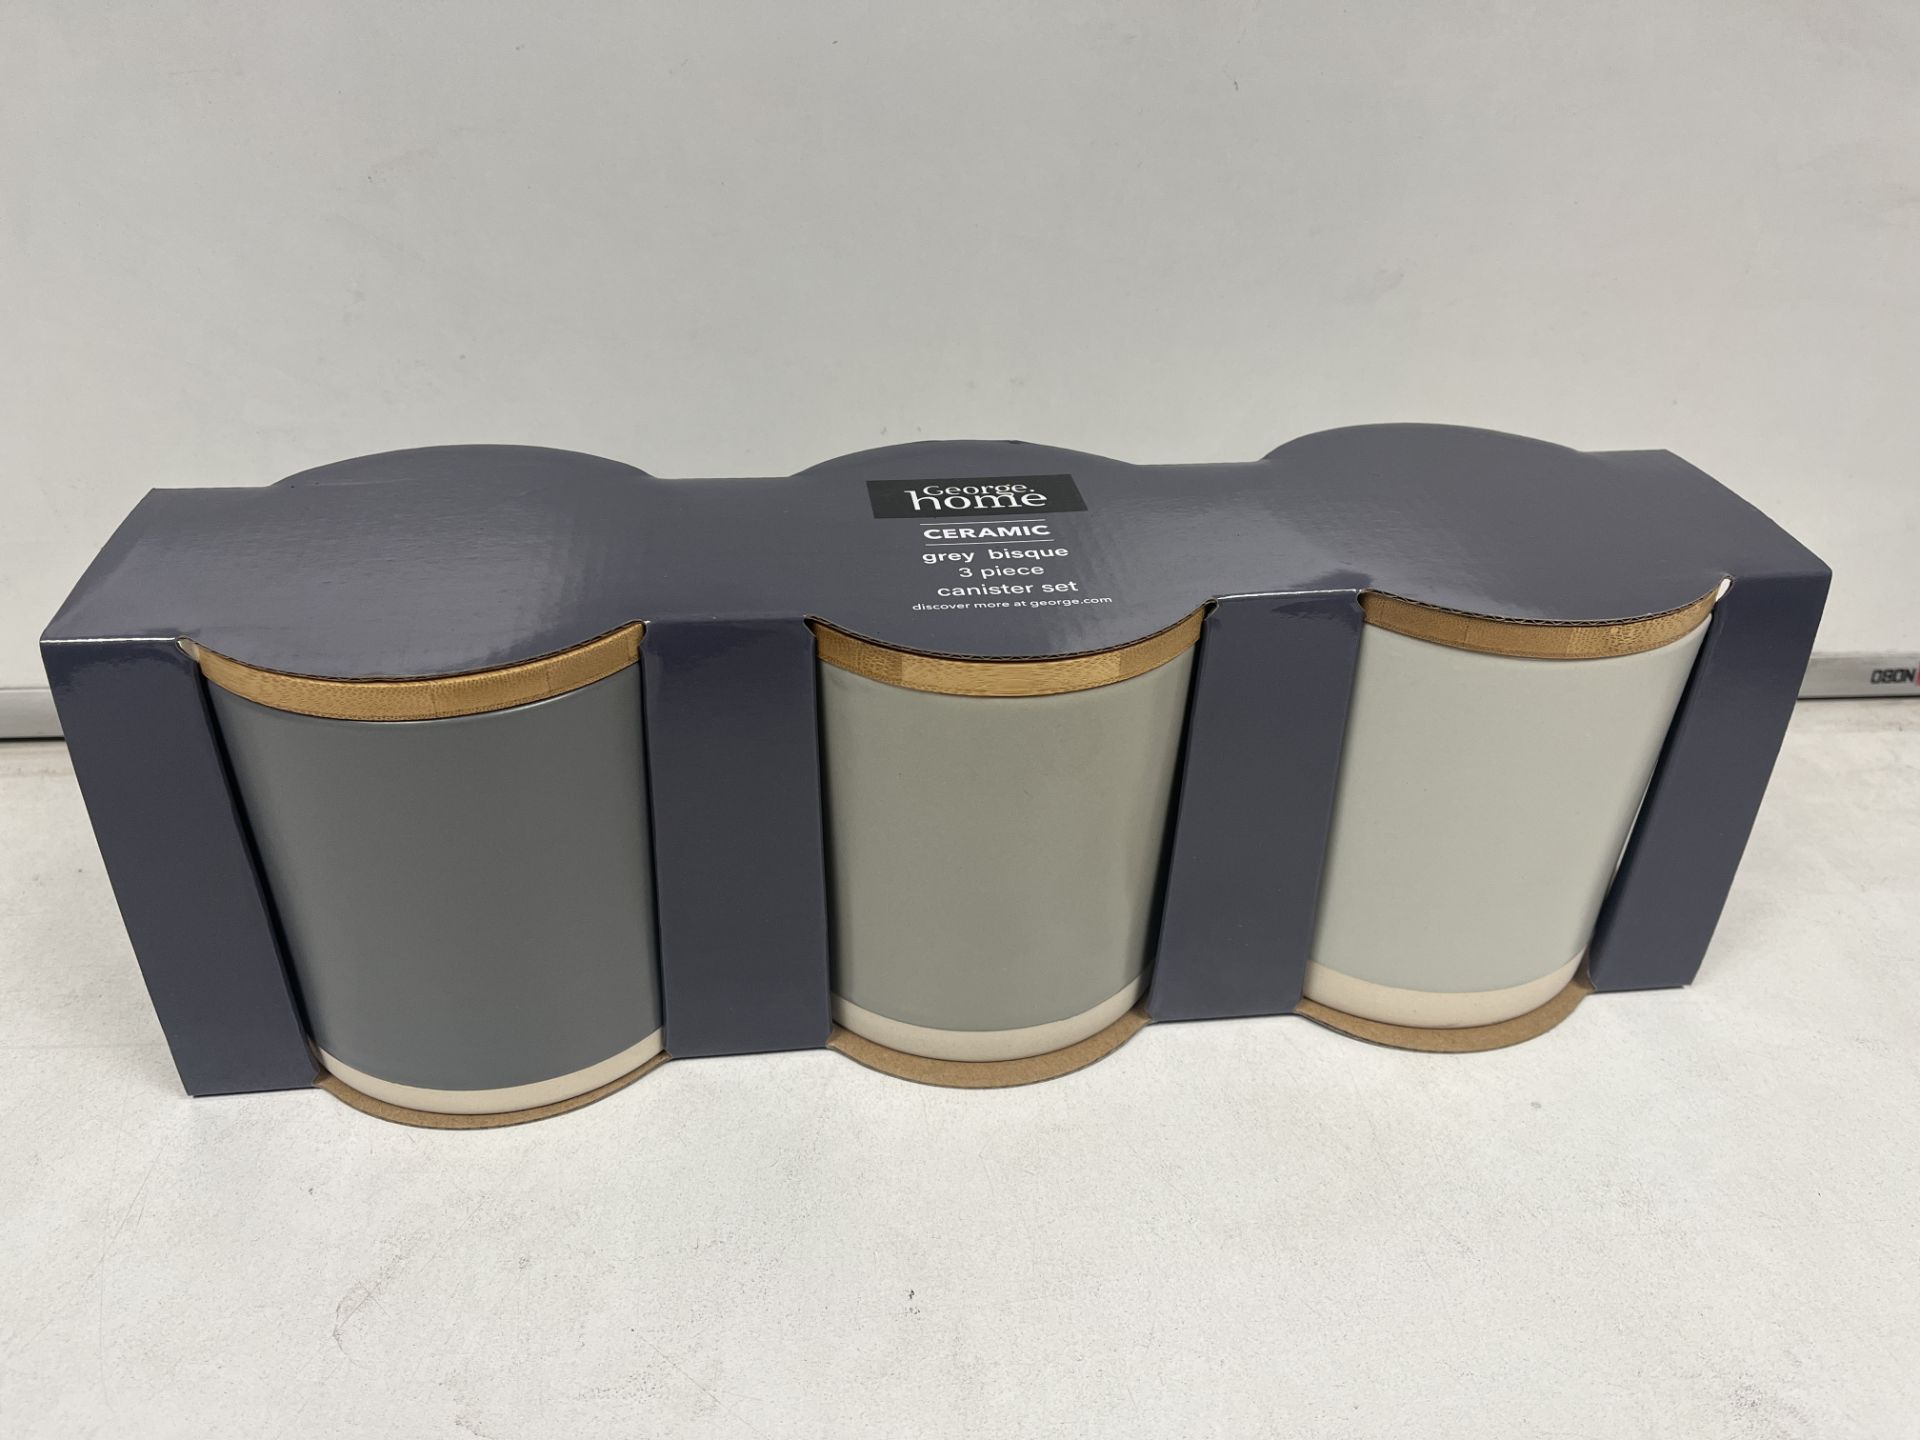 8 X NEW BOXED SETS OF 3 GEORGE HOME CERAMIC GREY BISQUE 3 PIECE CANISTER SETS. (ROW11RACK)